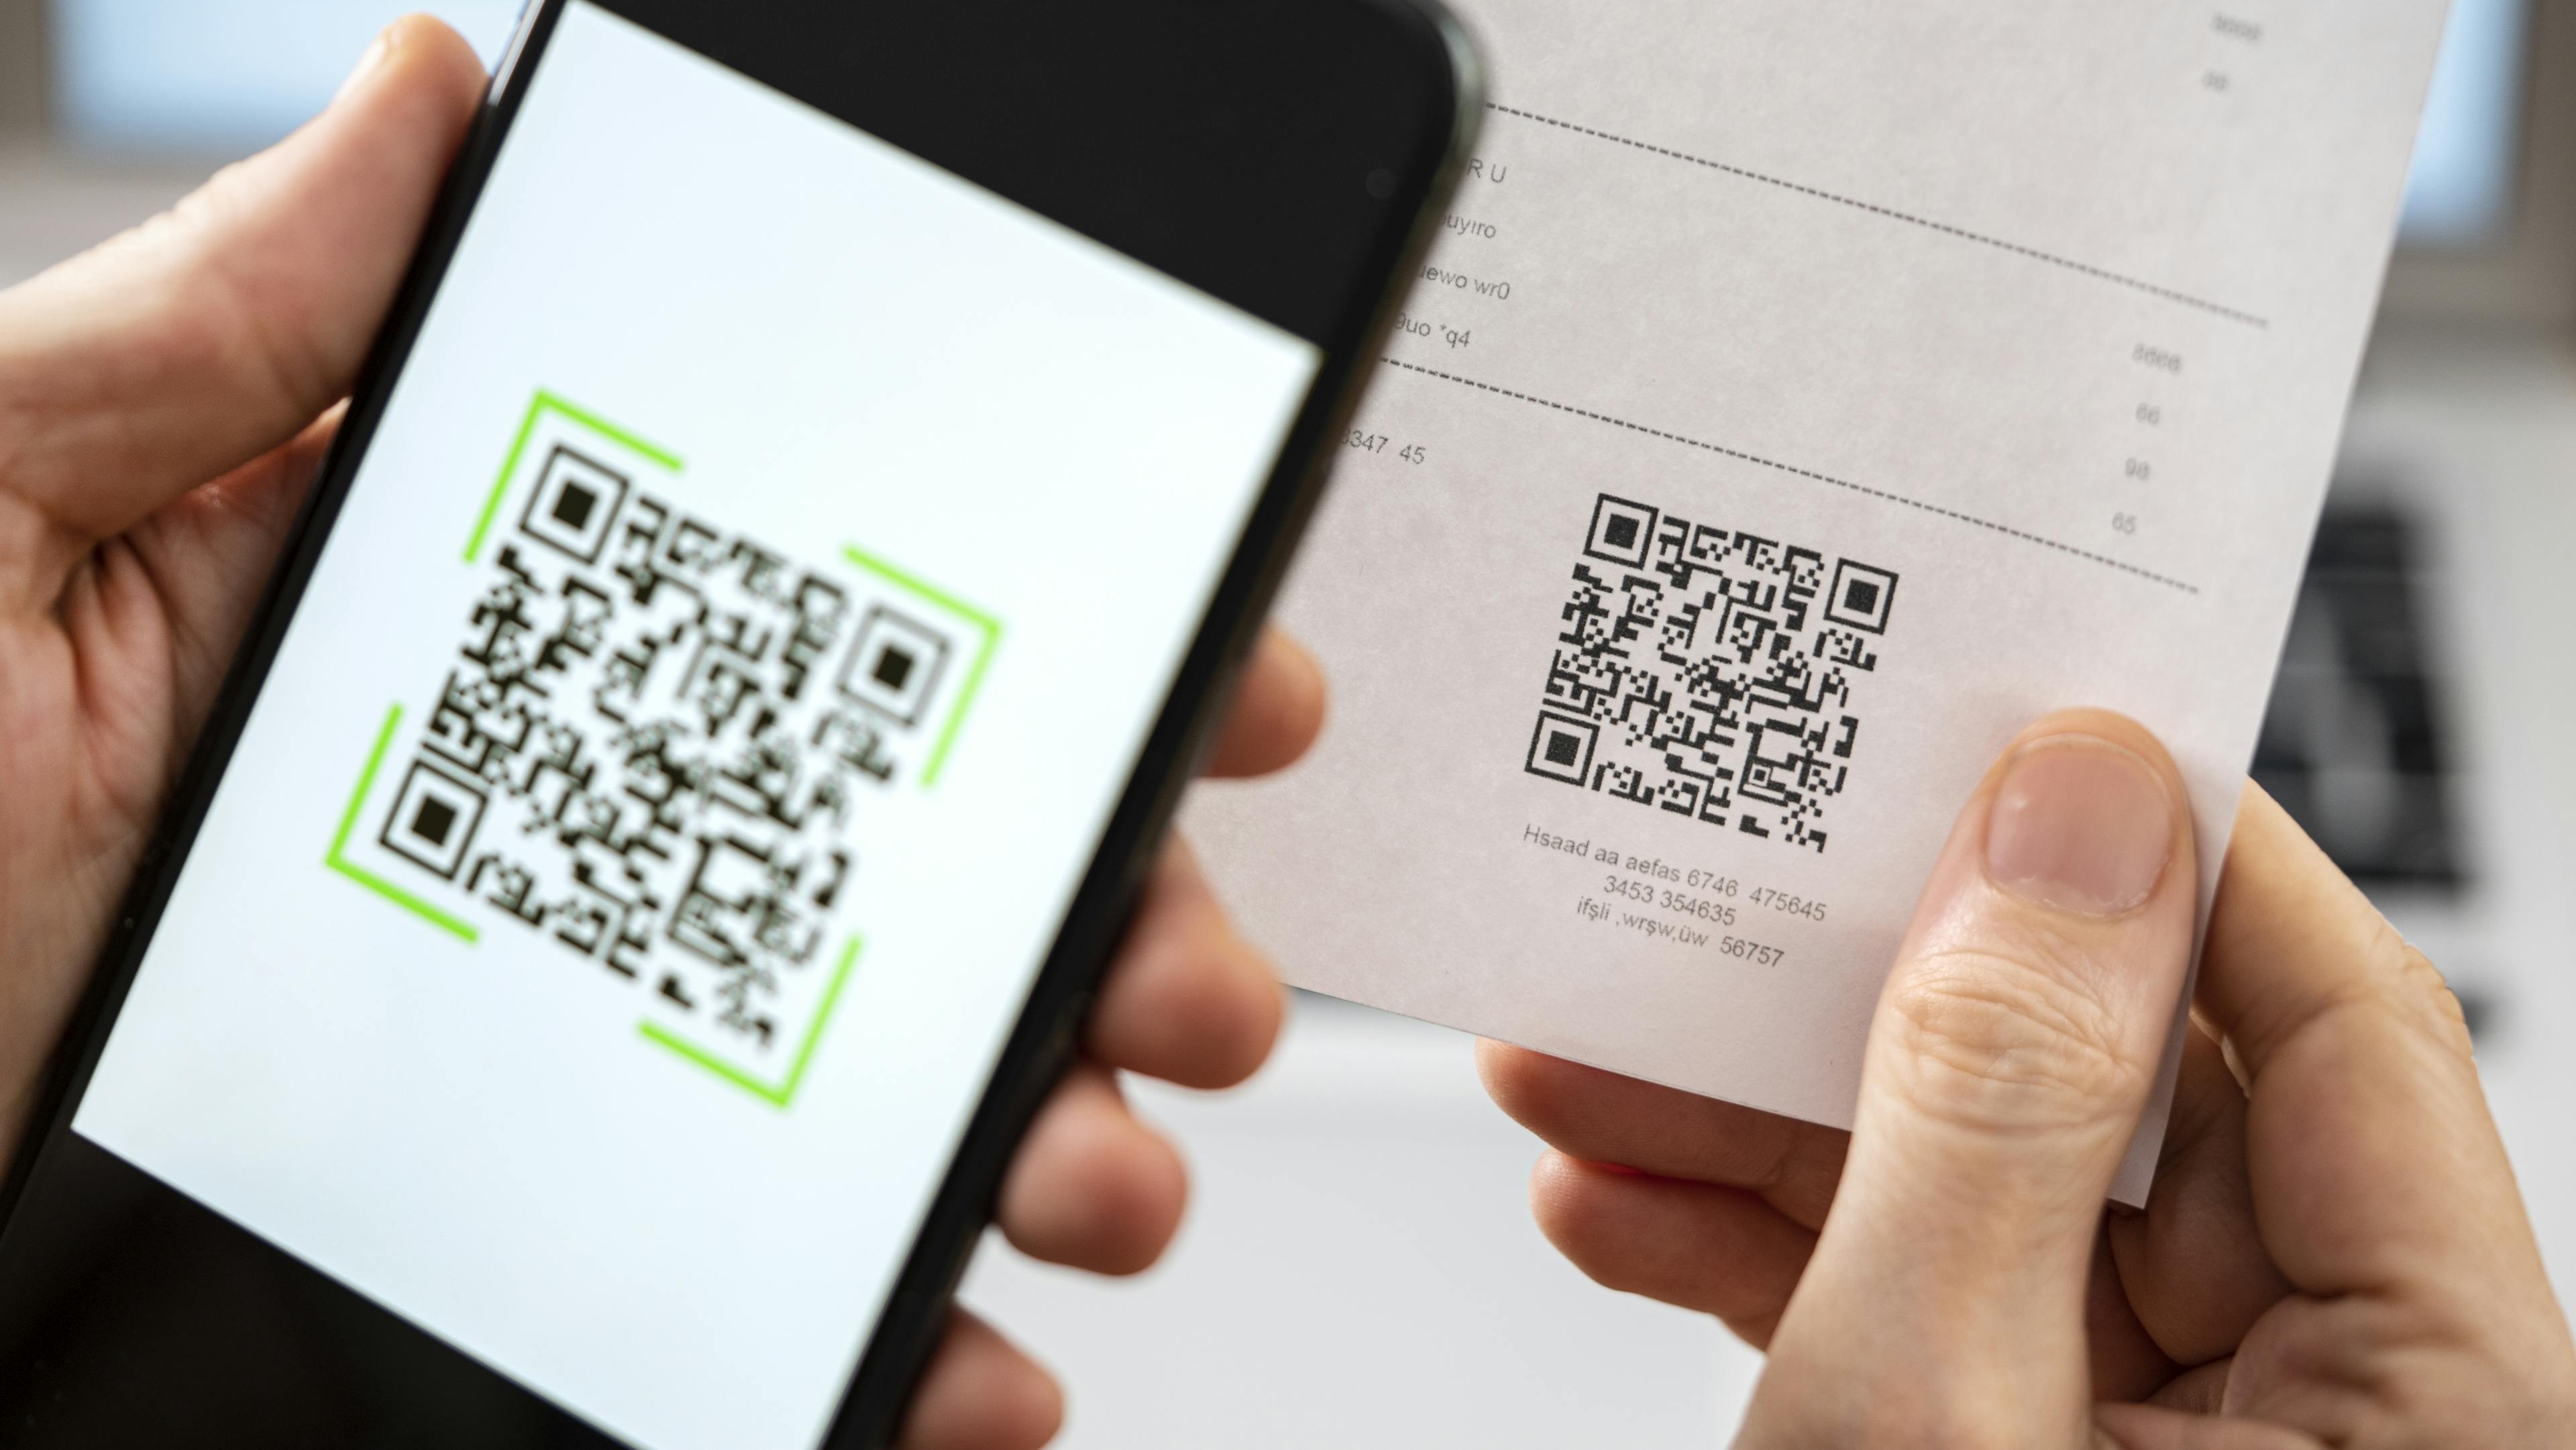 A person is scanning a QR code from the receipt. The QR code redirects to a form that allows to send feedback.